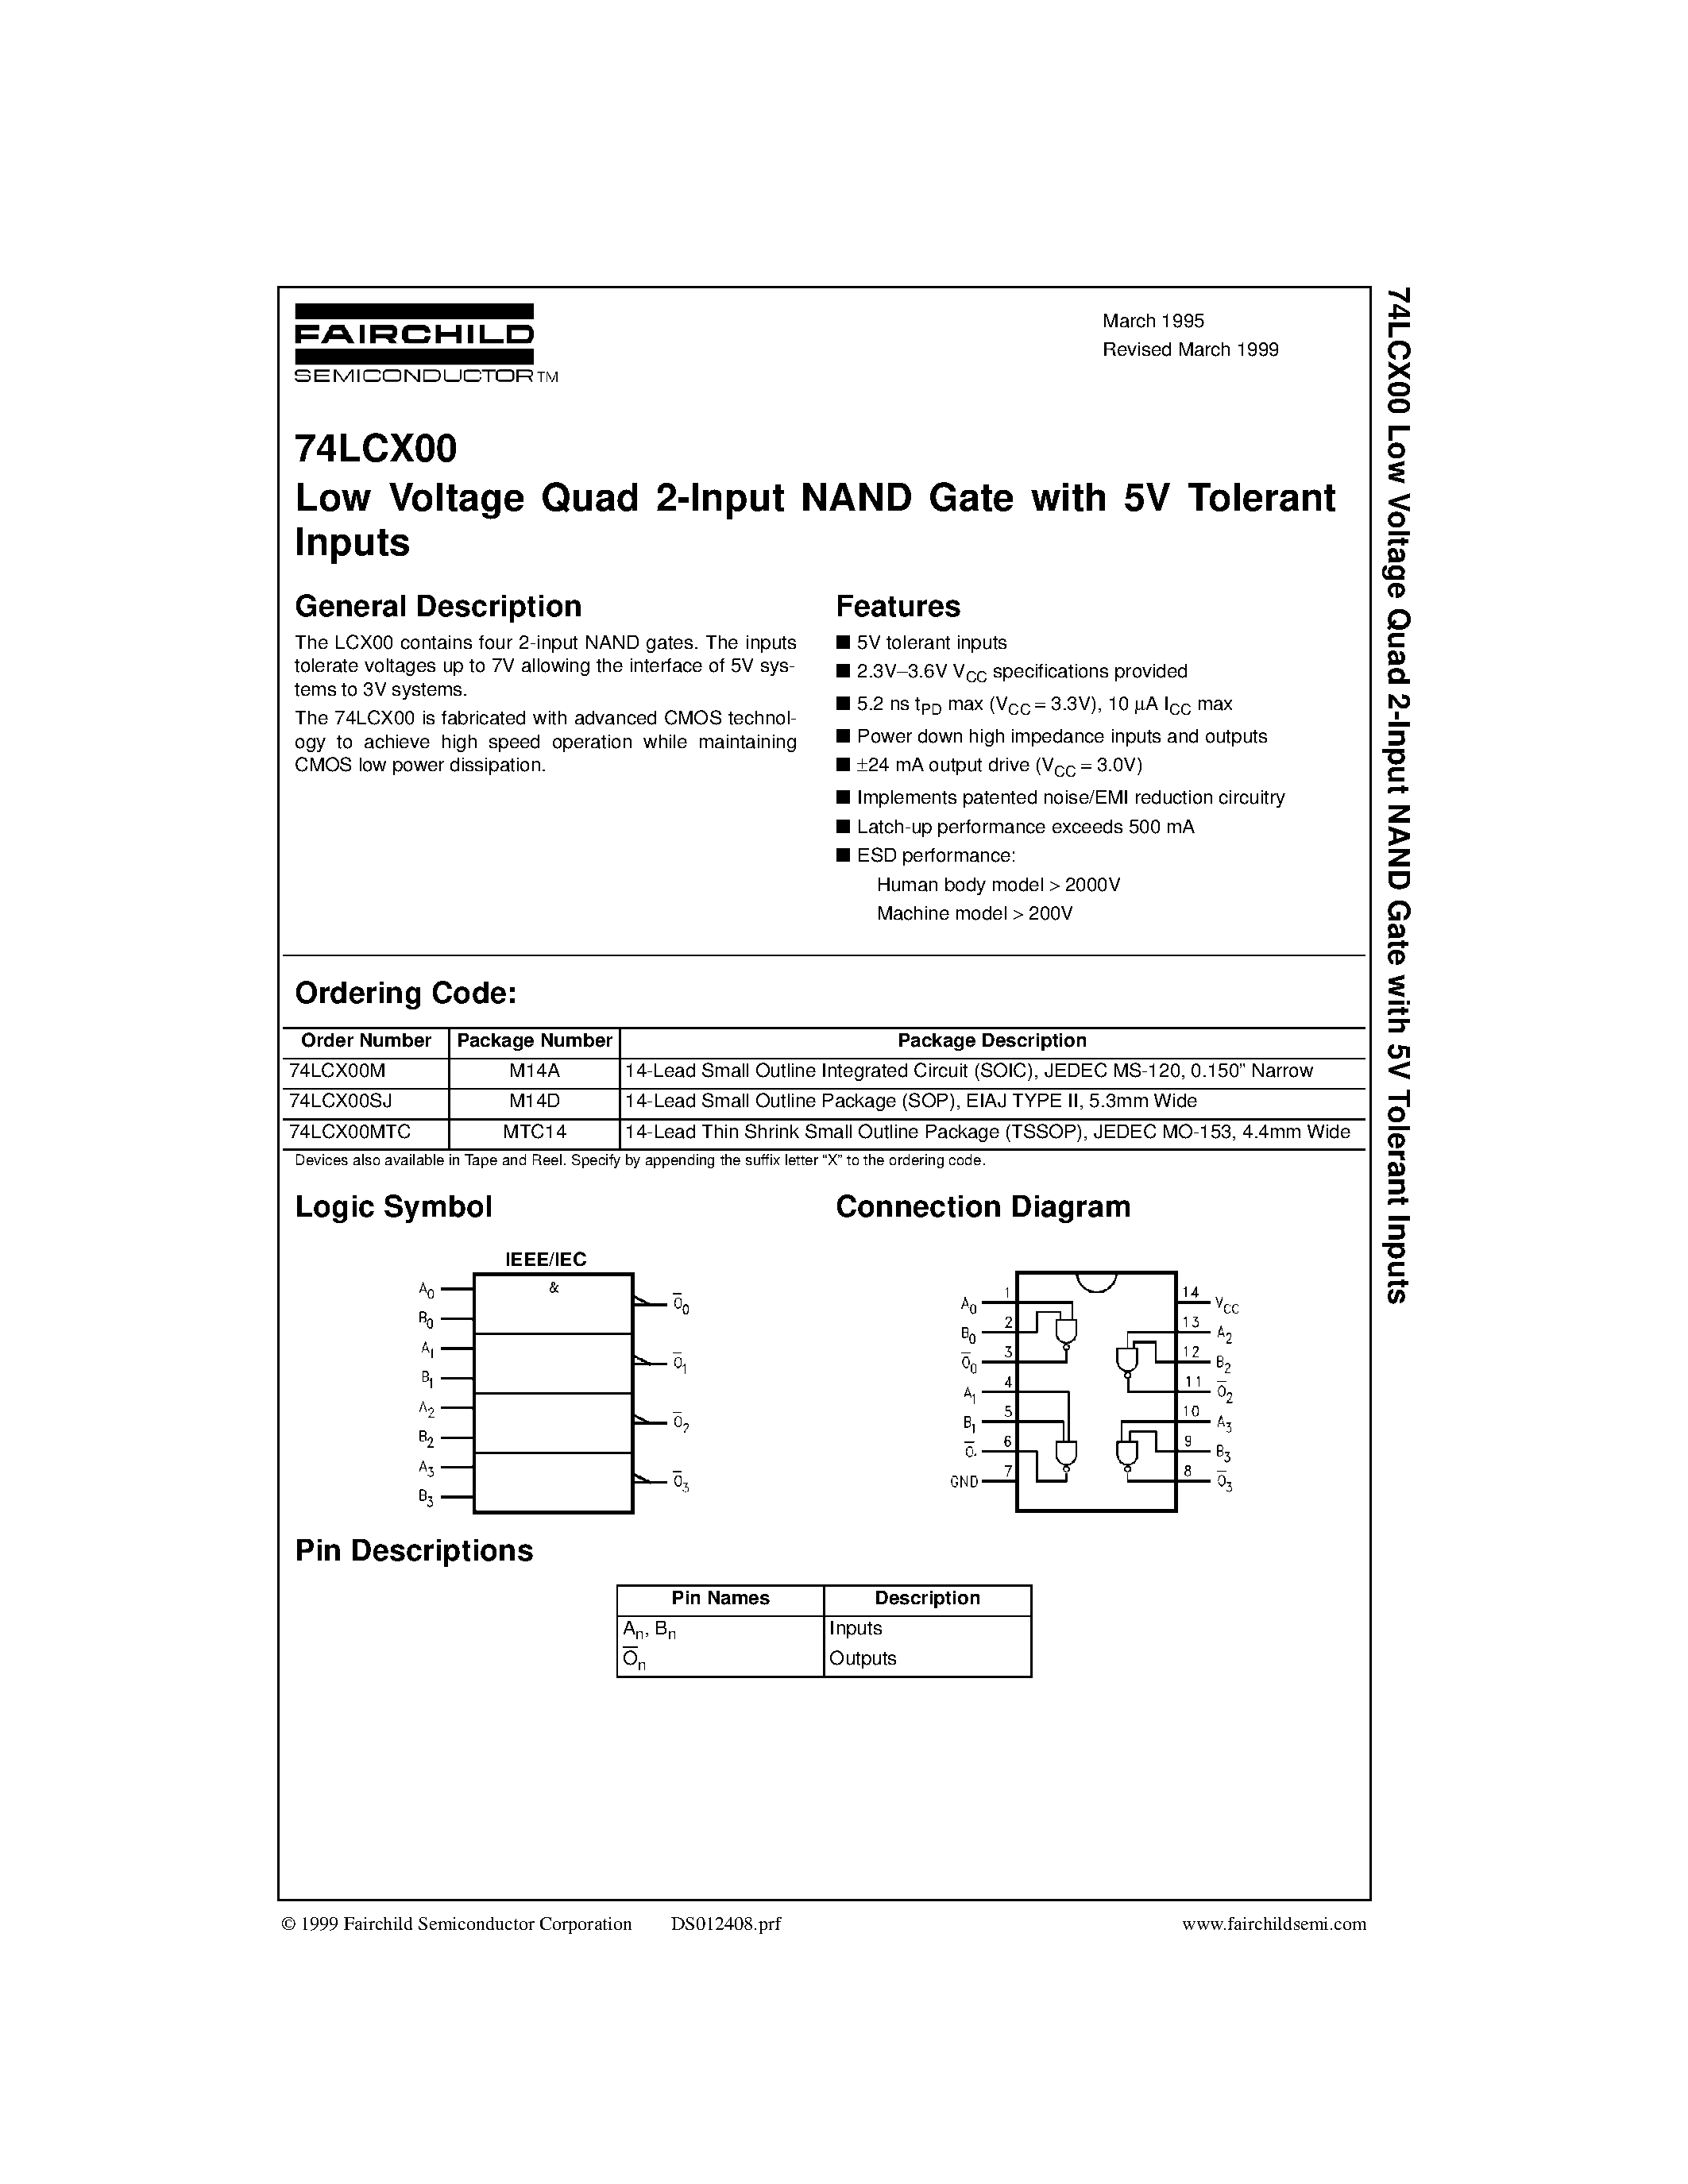 Datasheet 74LCX00MTC - Low Voltage Quad 2-Input NAND Gate with 5V Tolerant Inputs page 1